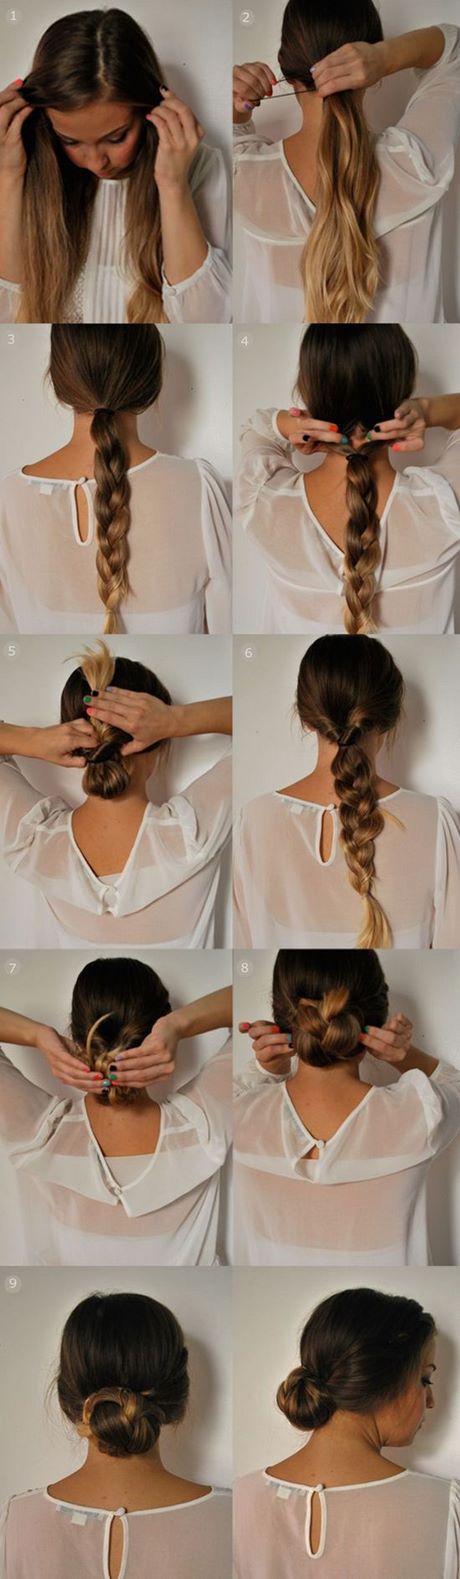 quick-and-easy-pretty-hairstyles-28_10 Quick and easy pretty hairstyles